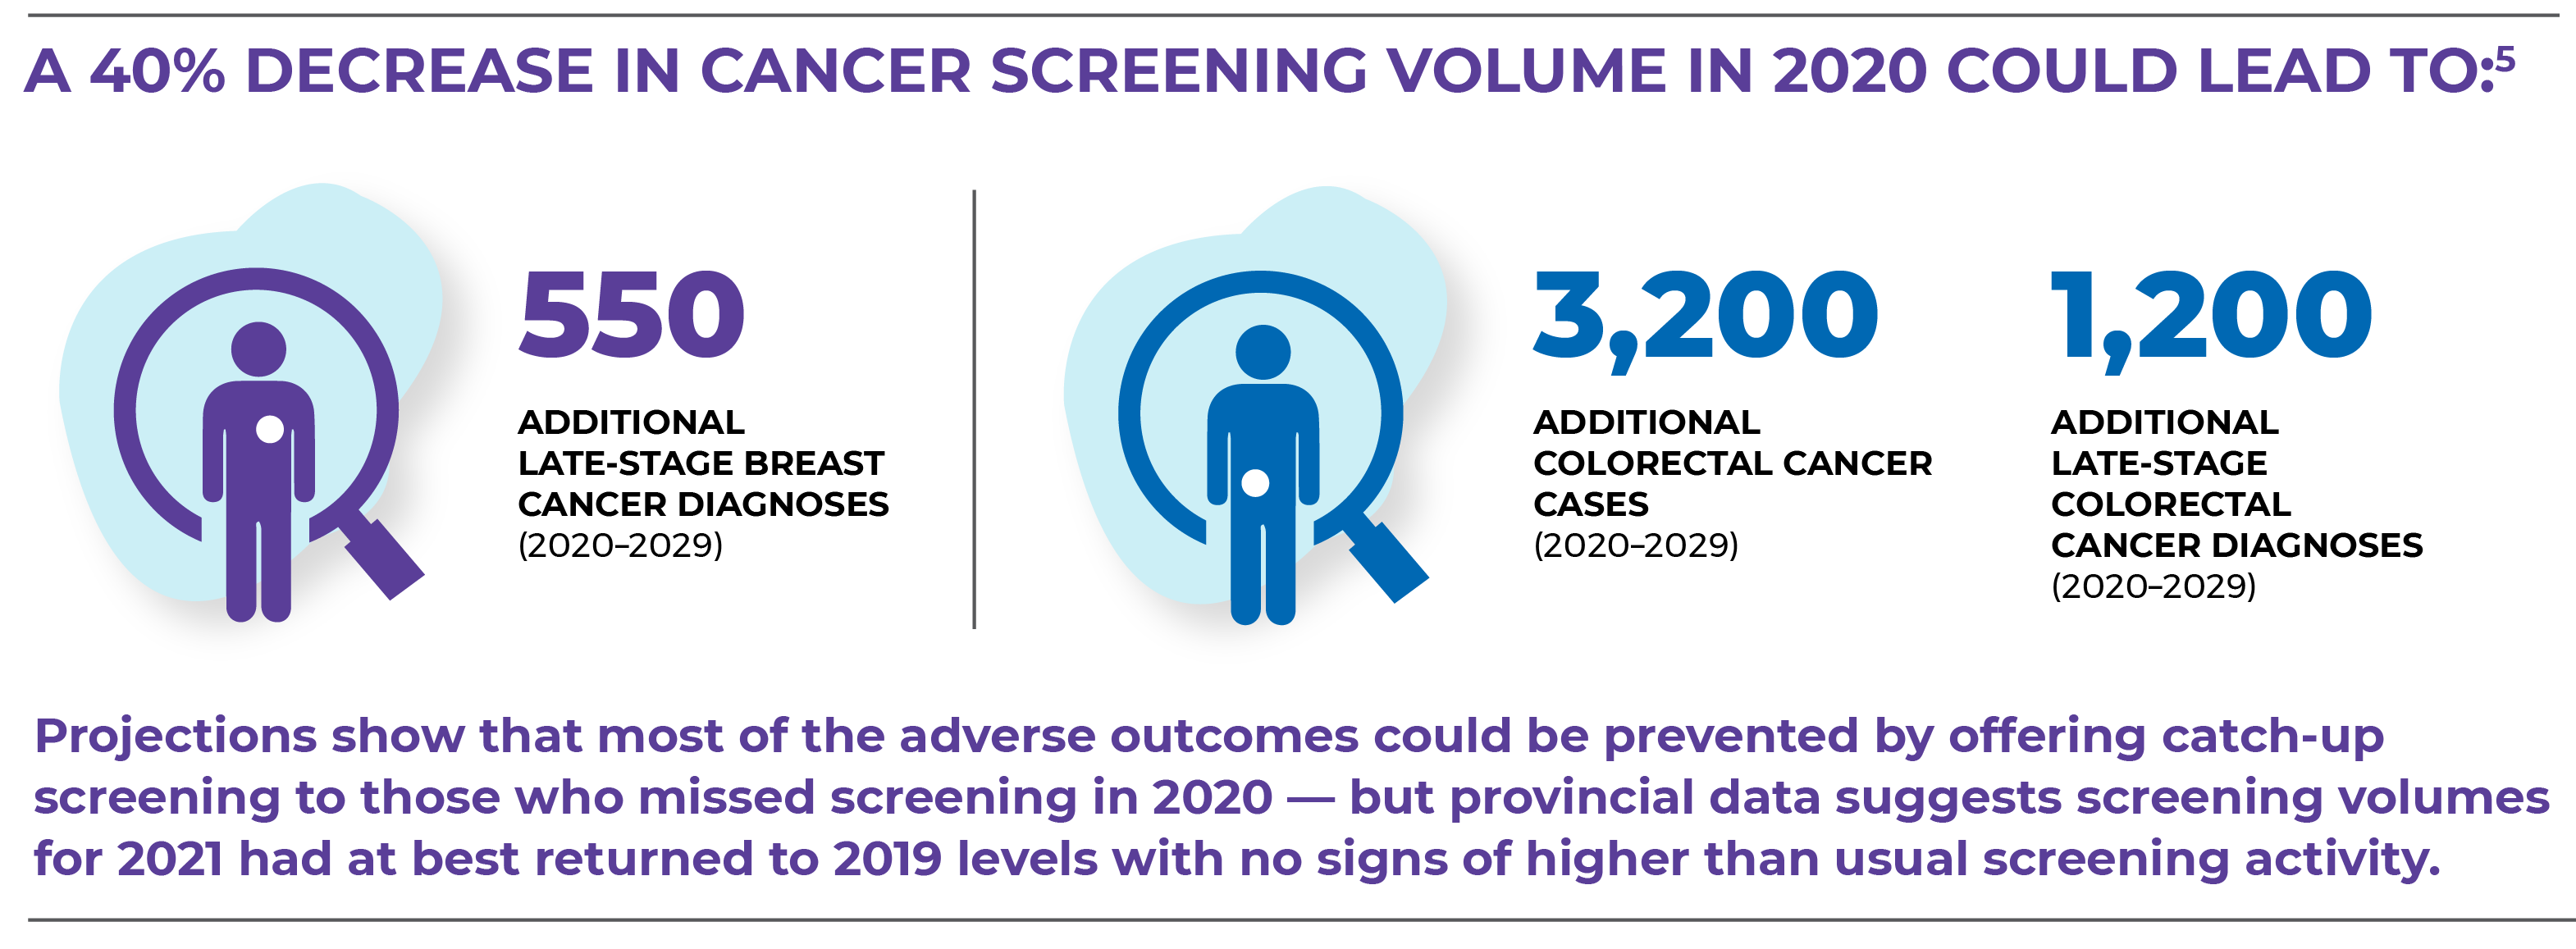 40% decrease in cancer screening volume in 2020 could lead to 550 additional late stage breast cancer diagnoses, 3,200 additional colorectal cancer cases, 1,200 additional late stage colorectal cancer diagnoses (2020-2029)